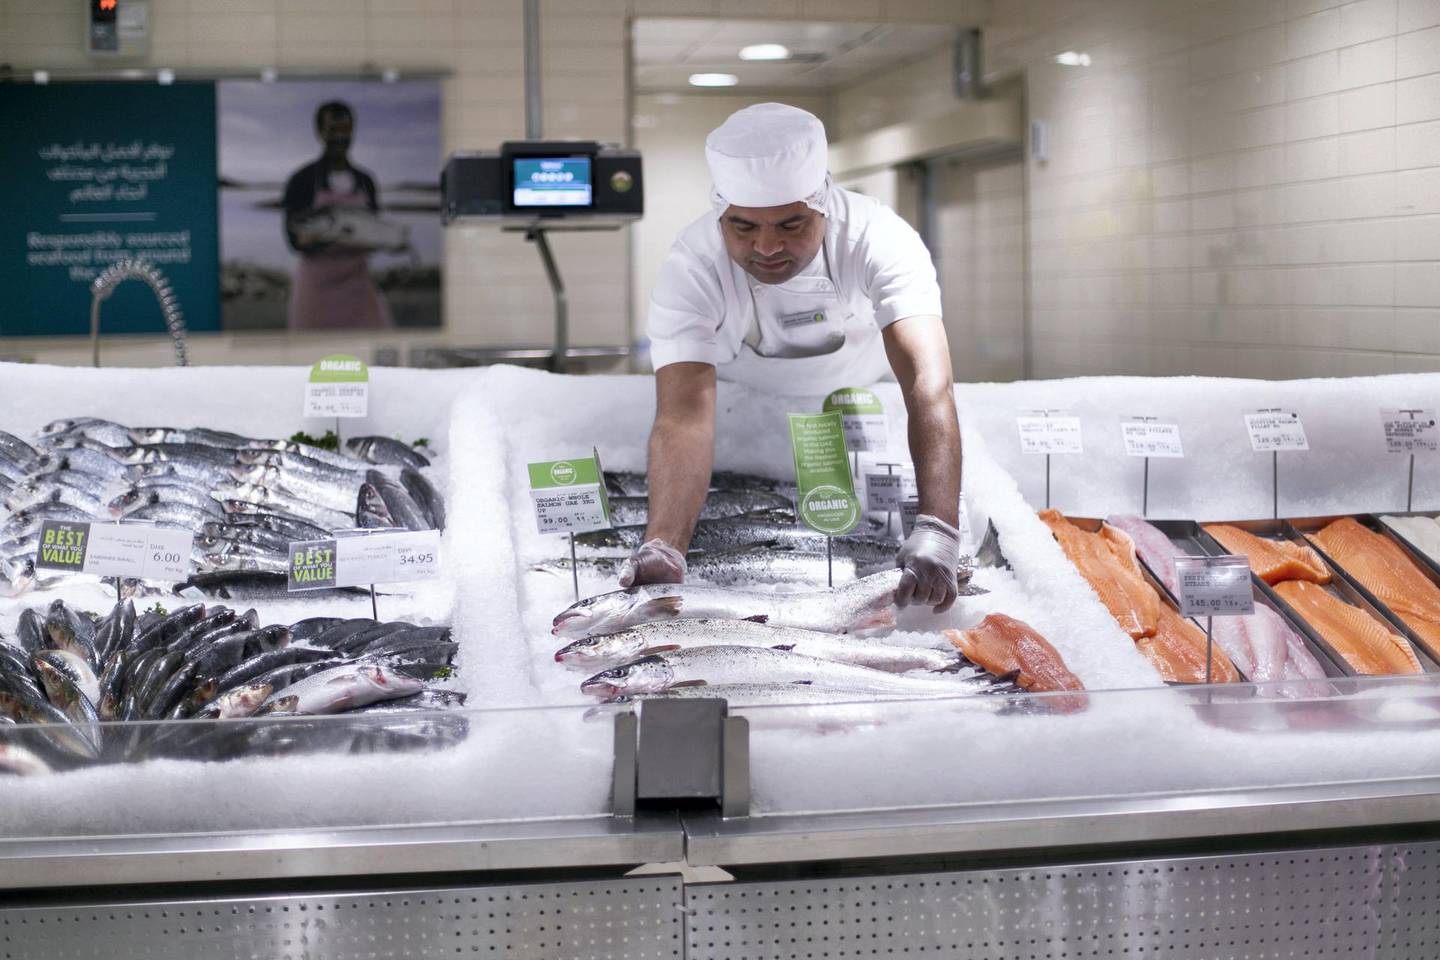 DUBAI, UNITED ARAB EMIRATES - April 4 2019.Fish Farm salmon in Spinney's.Fish Farm LLC is bringing home-grown salmon to the UAE's supermarkets and restaurants, with positive implications for food security. (Photo by Reem Mohammed/The National)Reporter: Section:  NA